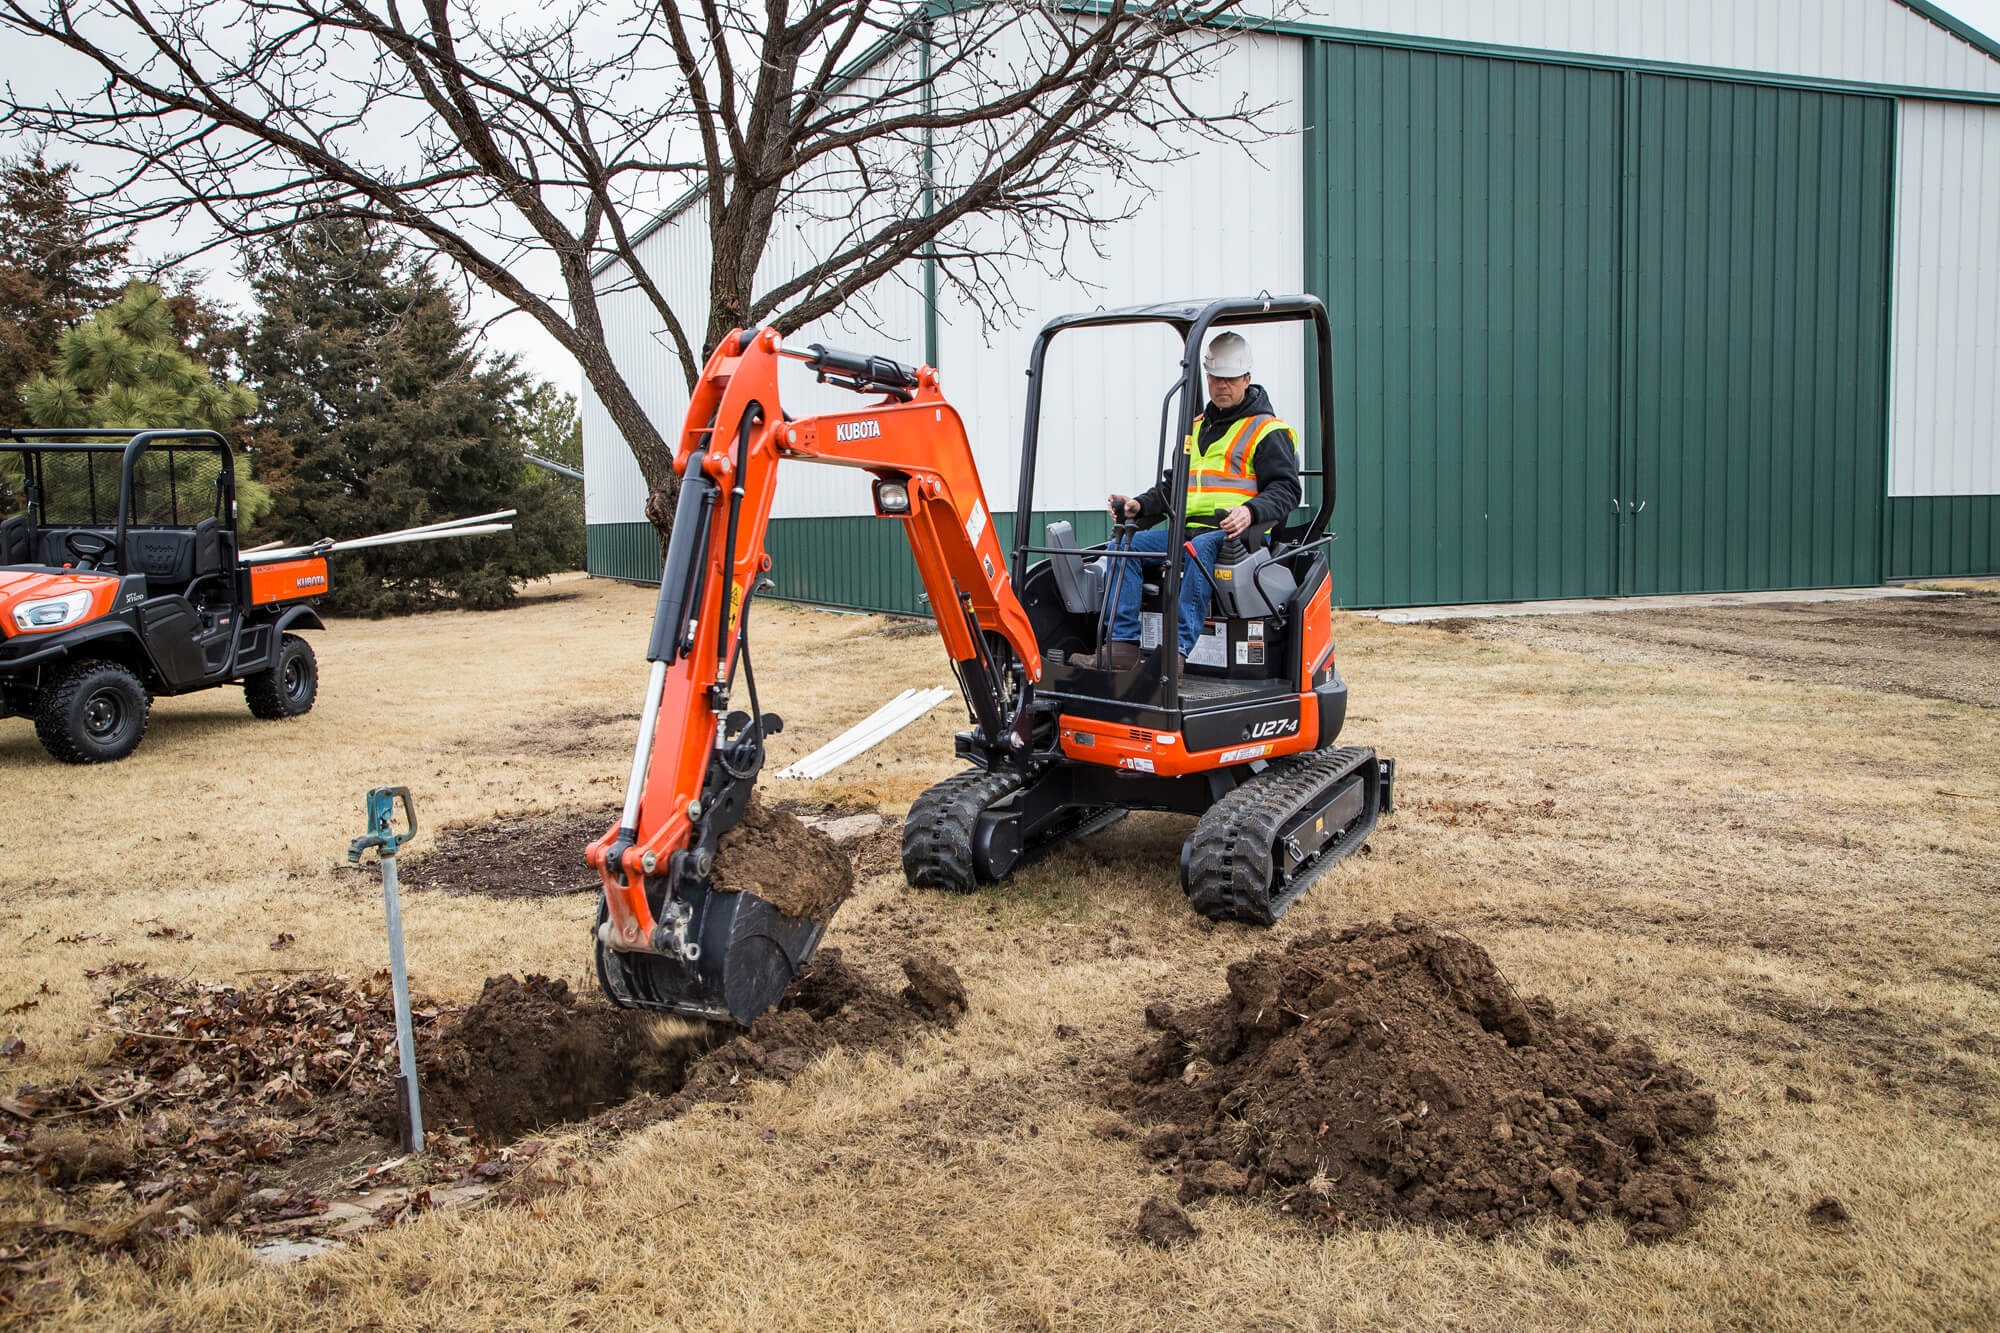 2 Reasons Why You Should Take The Mini Excavator On Rent